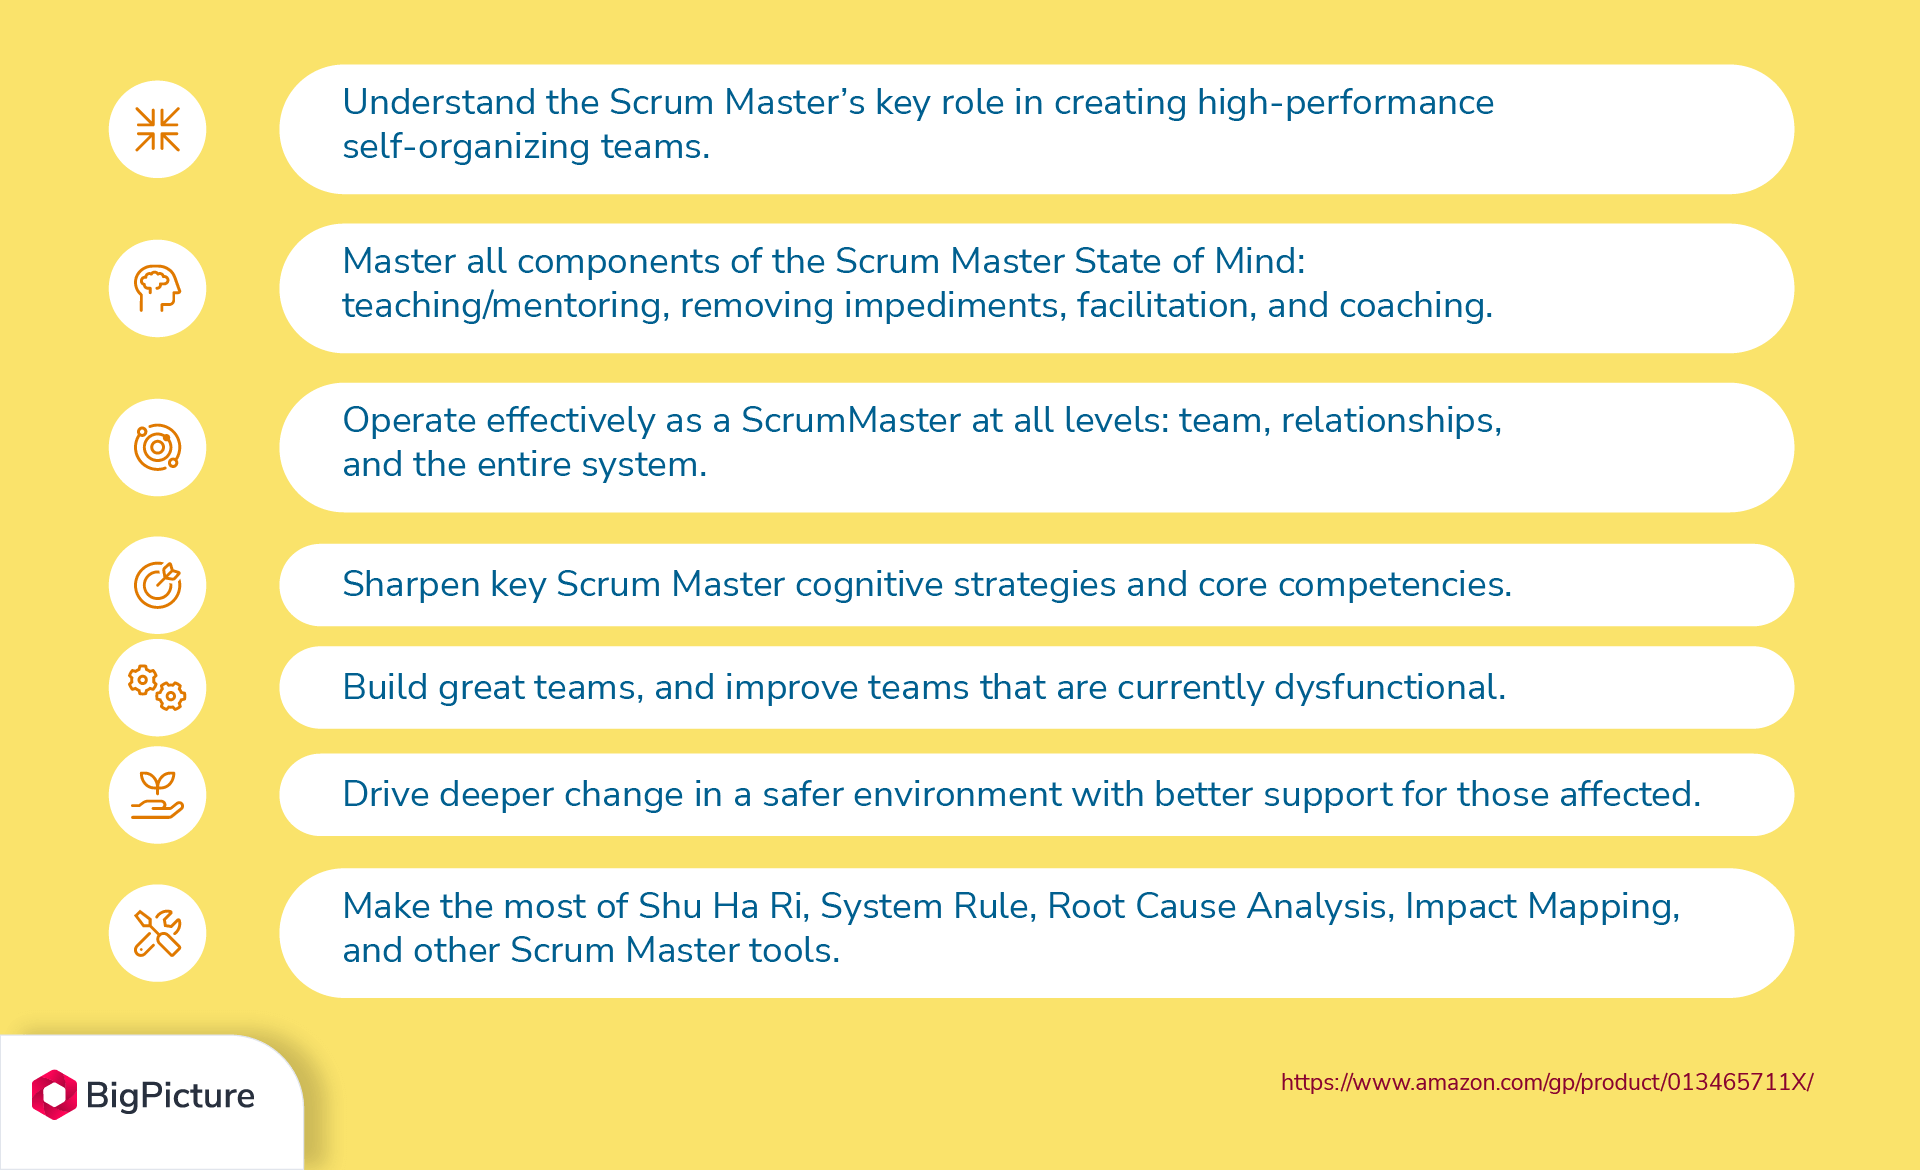 The Great Scrum Master key points